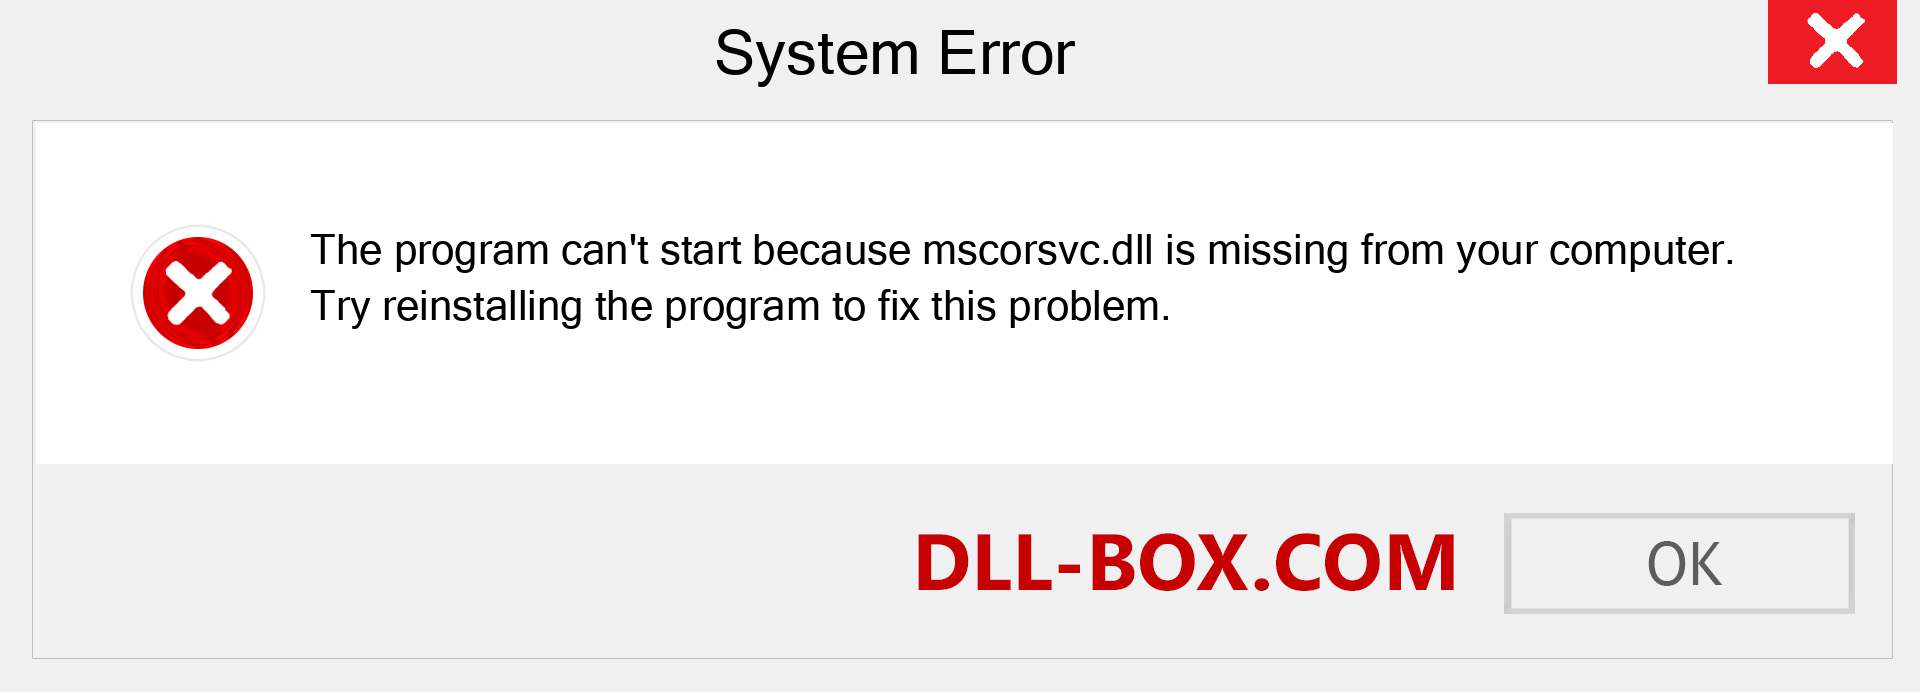  mscorsvc.dll file is missing?. Download for Windows 7, 8, 10 - Fix  mscorsvc dll Missing Error on Windows, photos, images